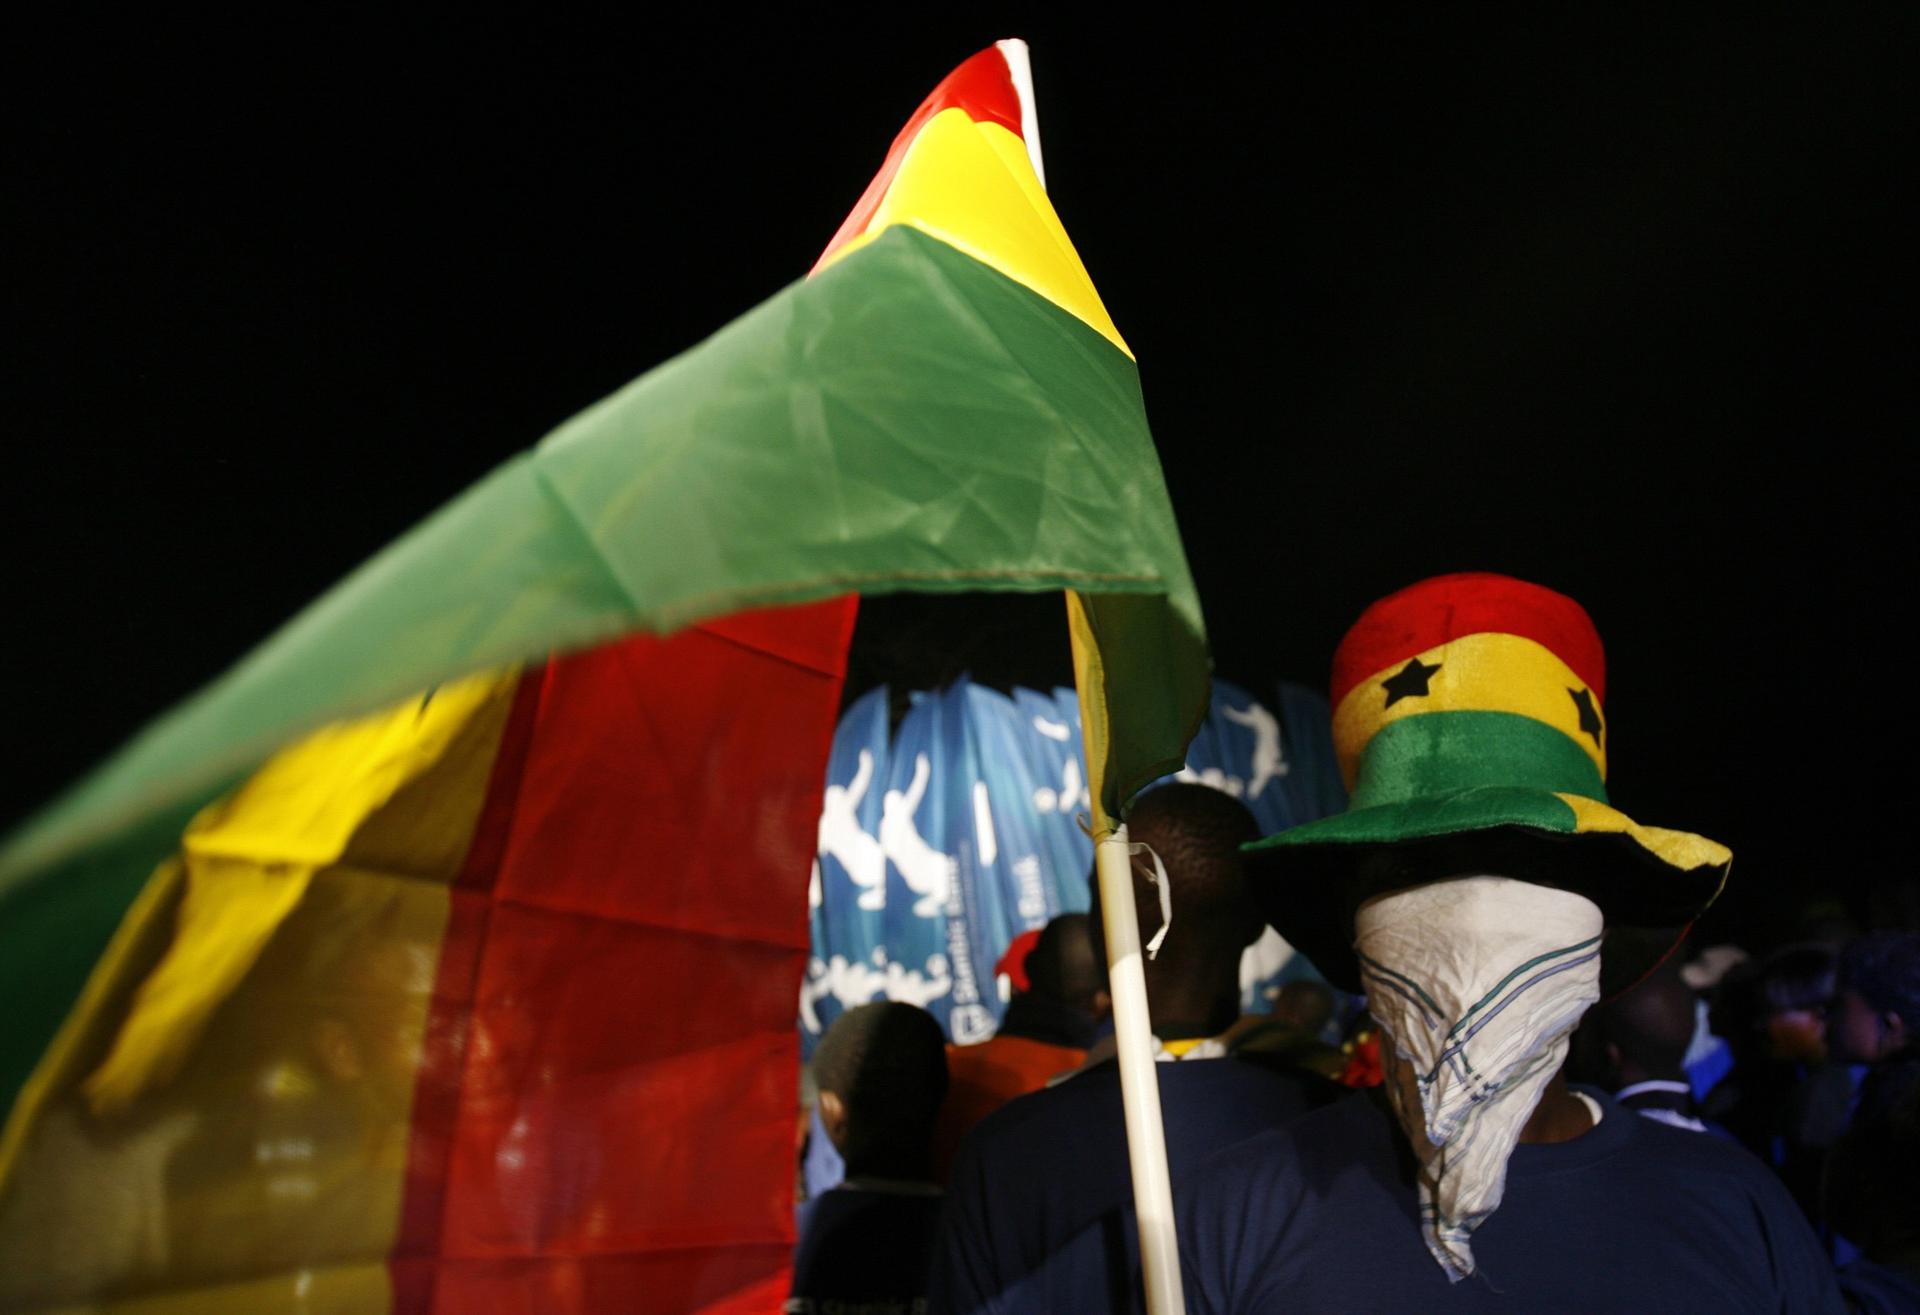 A man wearing a hat in the Ghanaian national colors